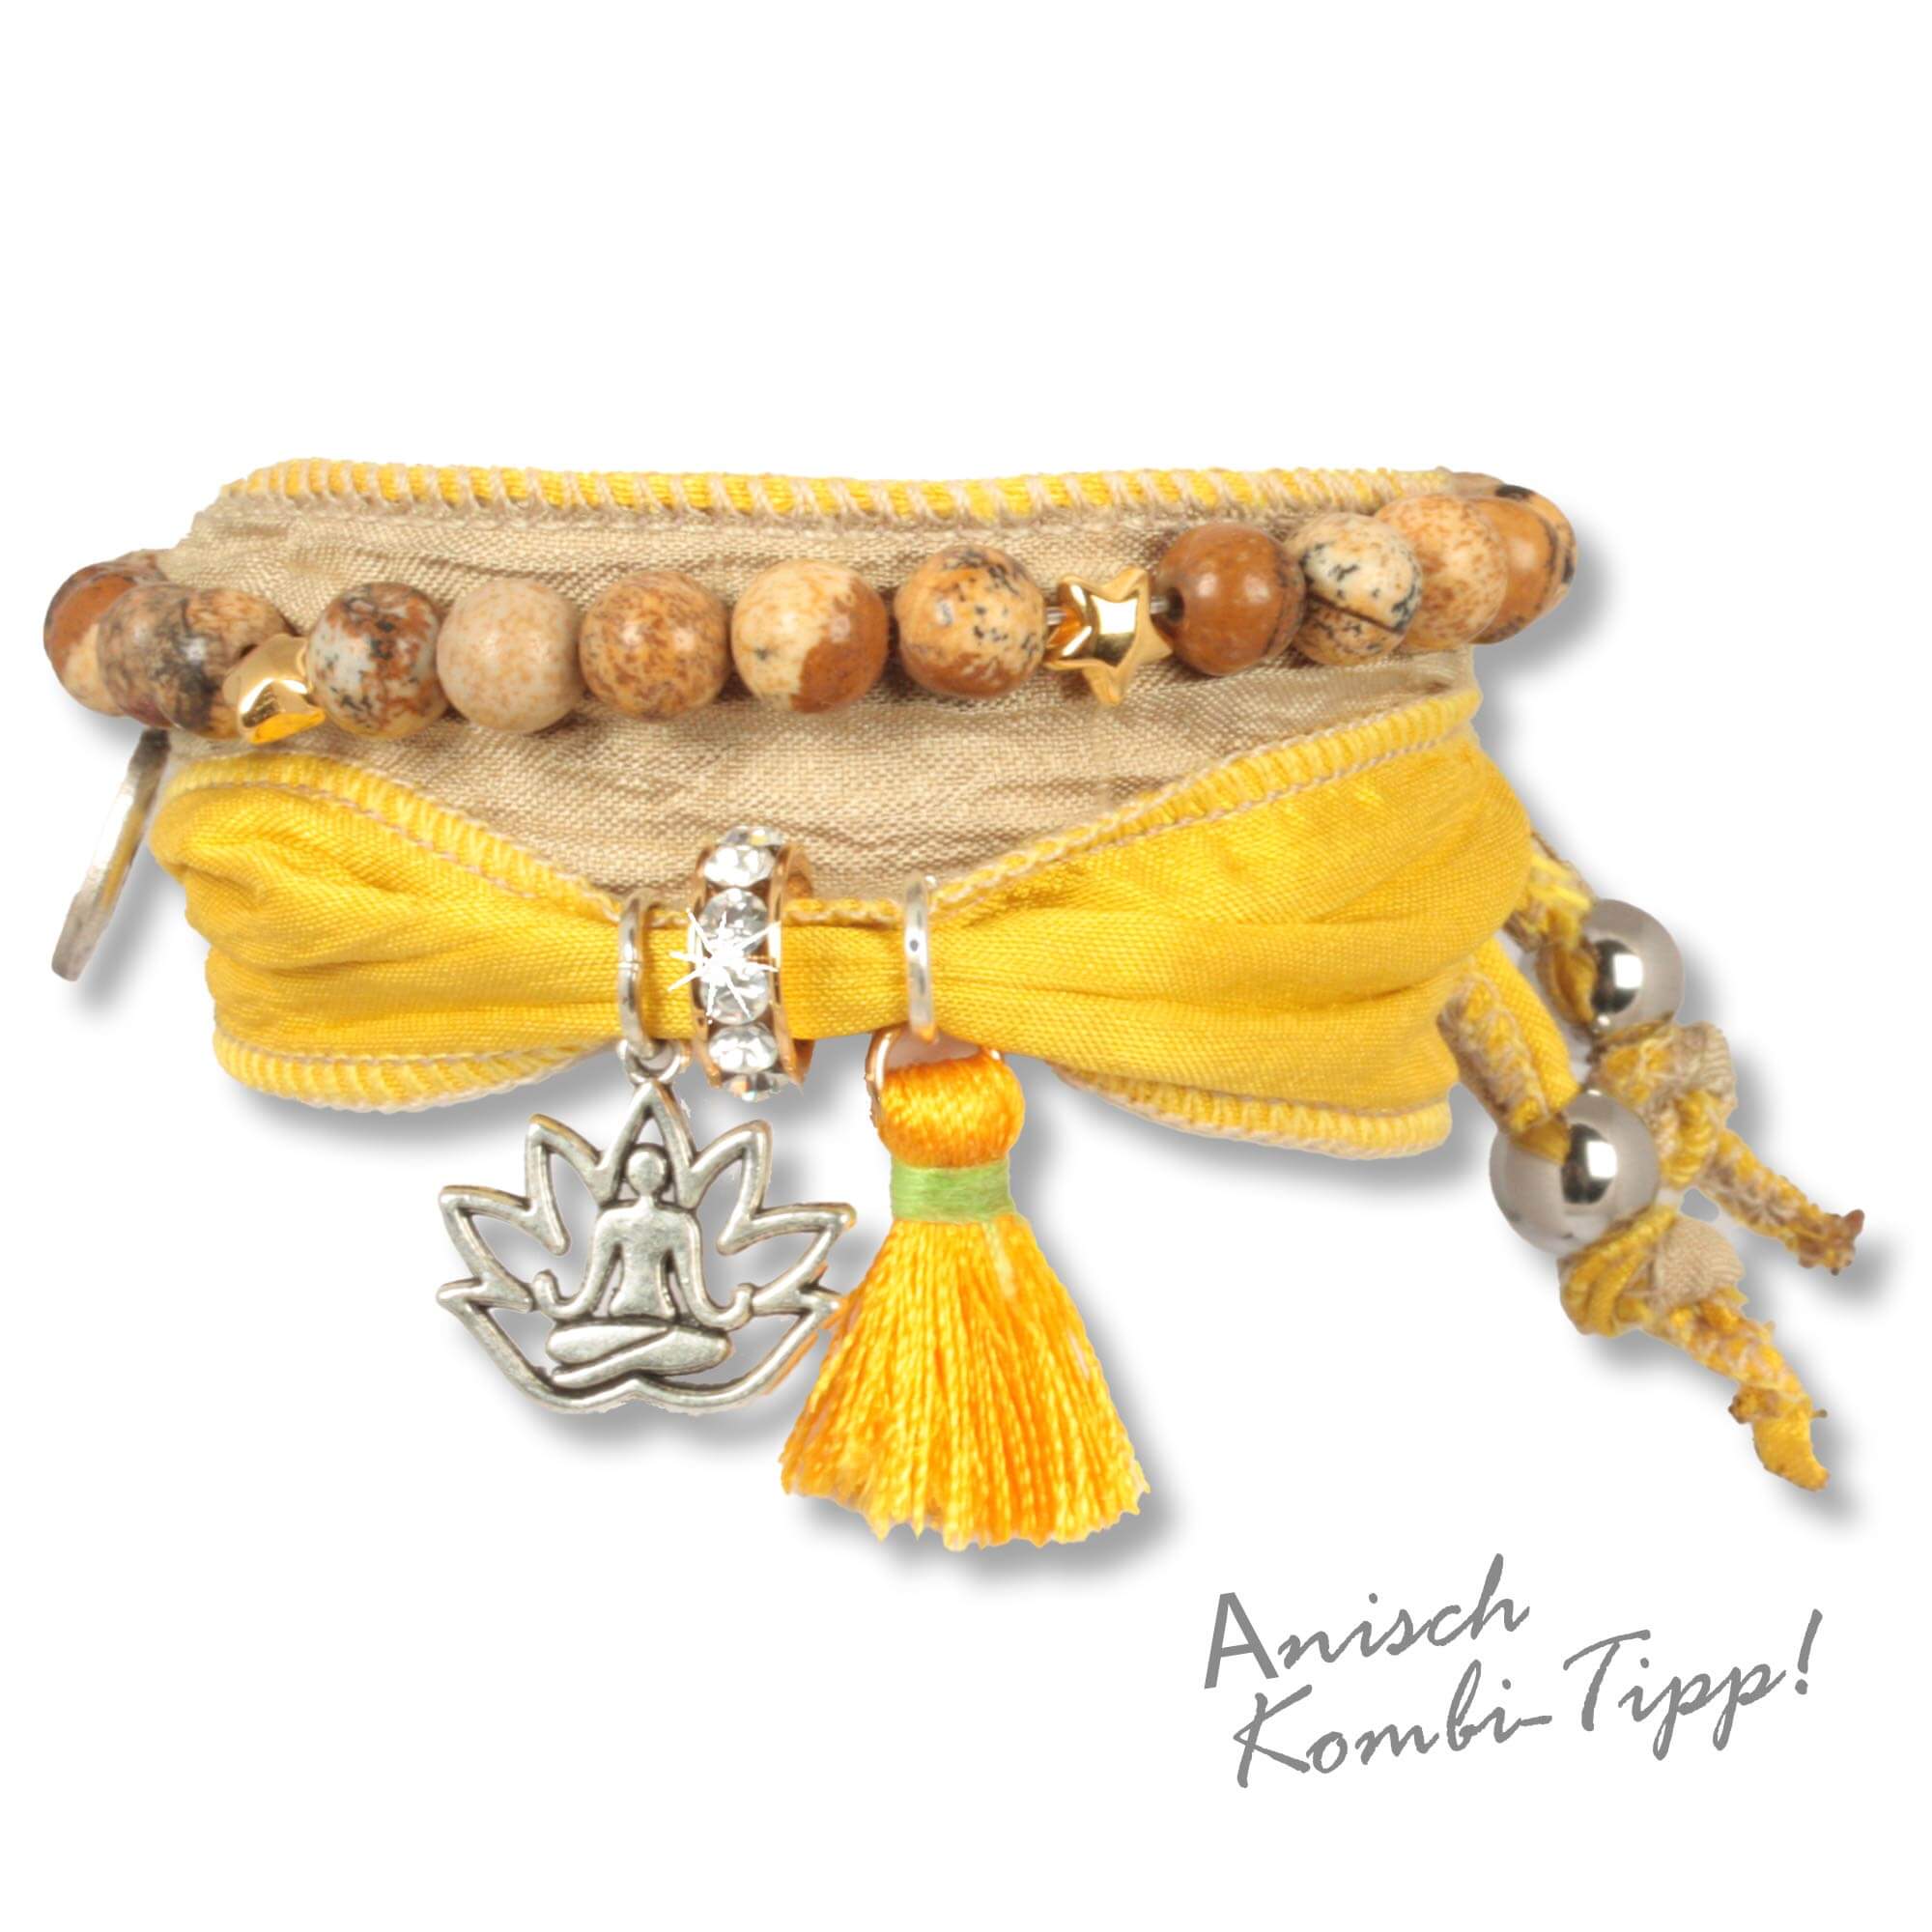 Handmade fabric bracelet made from saris and silk fabrics in yellow, natural colours and gold. Decorated with a metal lotus flower depicting a meditating Buddha, a yellow silk tassel and a rondel set with Czech crystals. Manufacturer: Anisch de la Cara. U